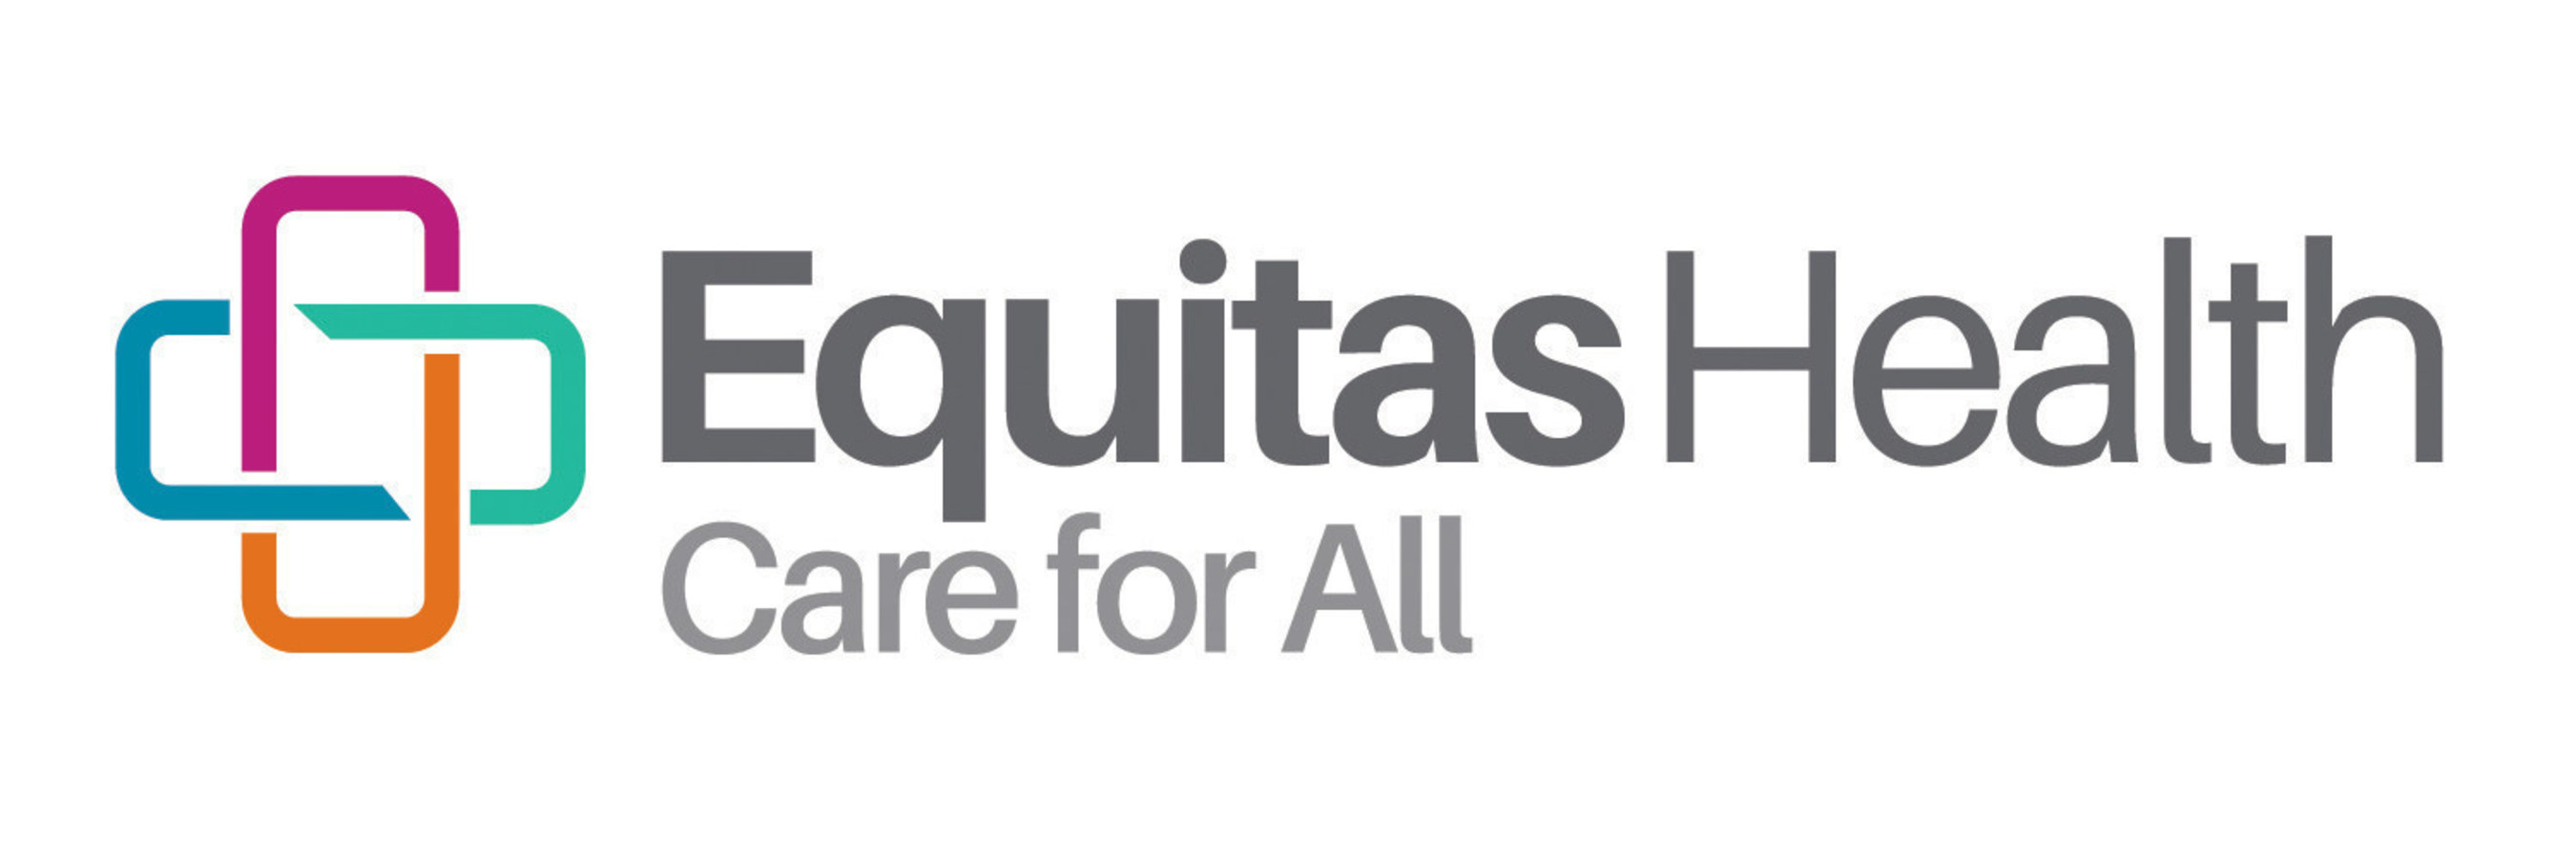 Equitas Health (formerly AIDS Resource Center Ohio) is a not-for-profit community-based healthcare system founded in 1984. Its expanded mission makes it one of the nation's largest HIV/lesbian, gay, bisexual, transgender, and queer/questioning (LGBTQ) healthcare organizations. It serves more than 67,000 individuals in Ohio each year through its diverse healthcare and social service delivery system focused around: primary and specialized medical care, behavioral health, HIV/STI prevention, advocacy, and community health initiatives. Learn more at www.equitashealth.com